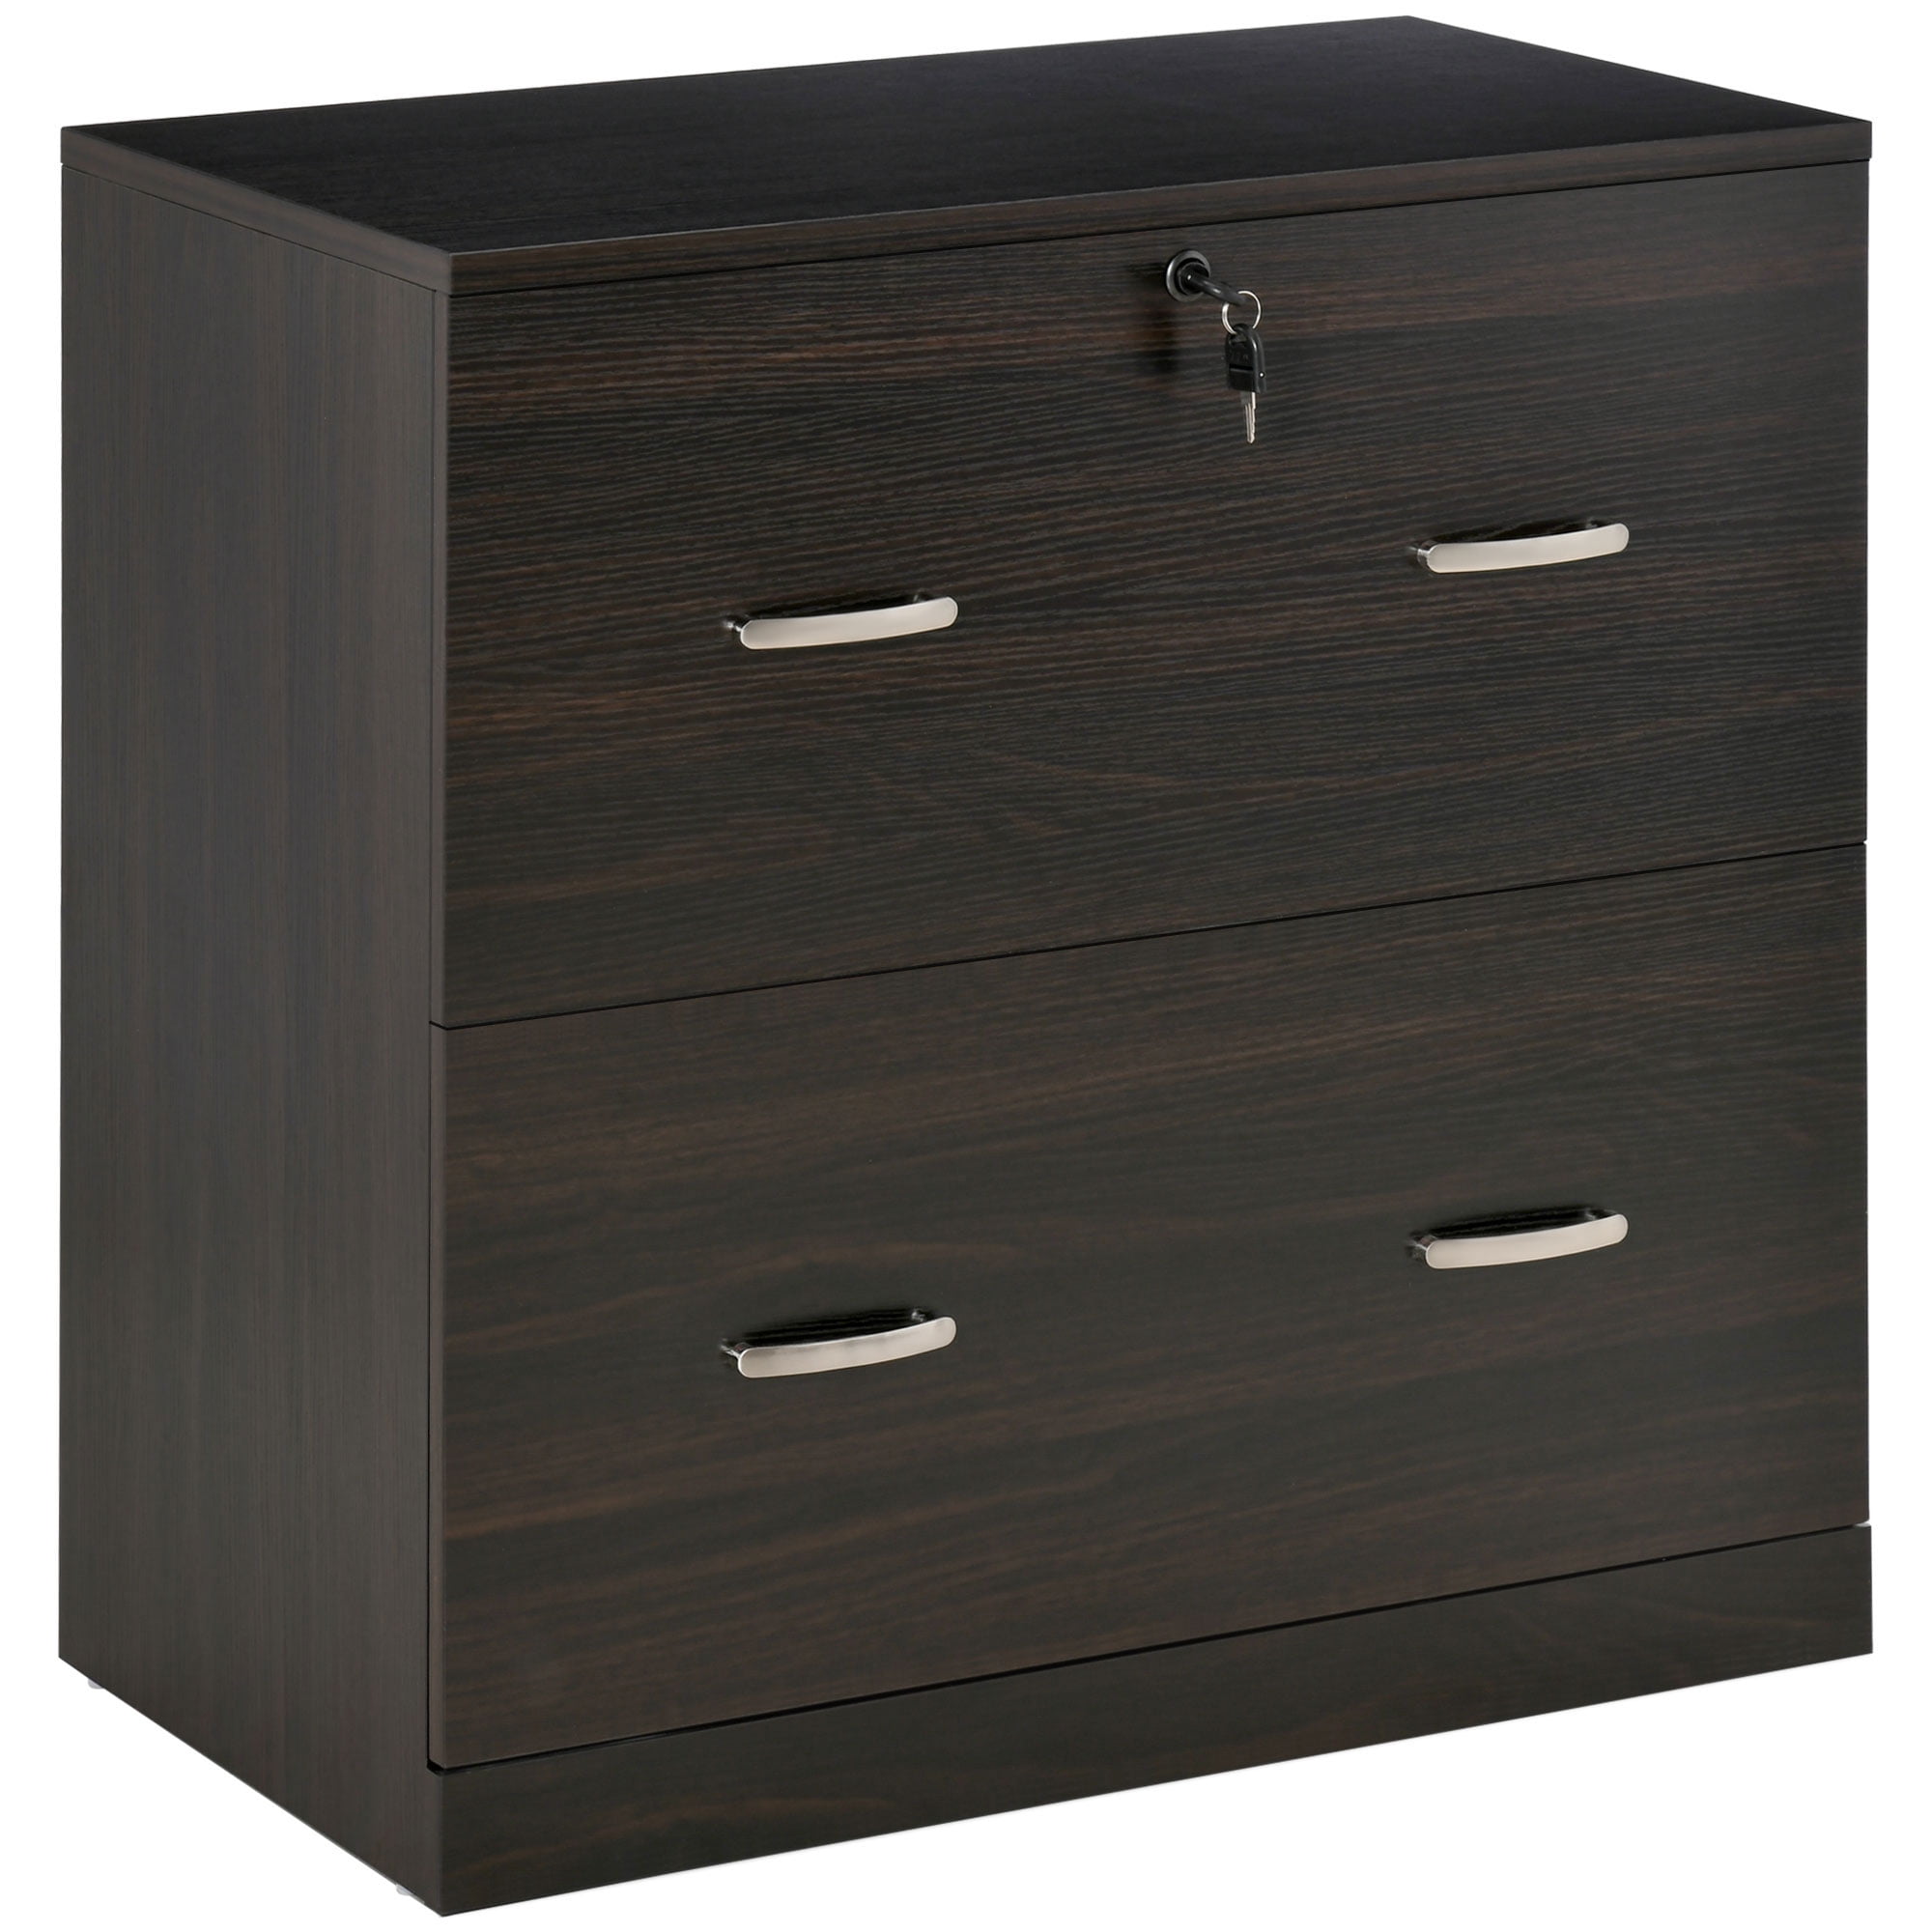 Details about   Steel Metal Filing Cabinet 2 Drawer Office Storage Industrial Lockable Home 